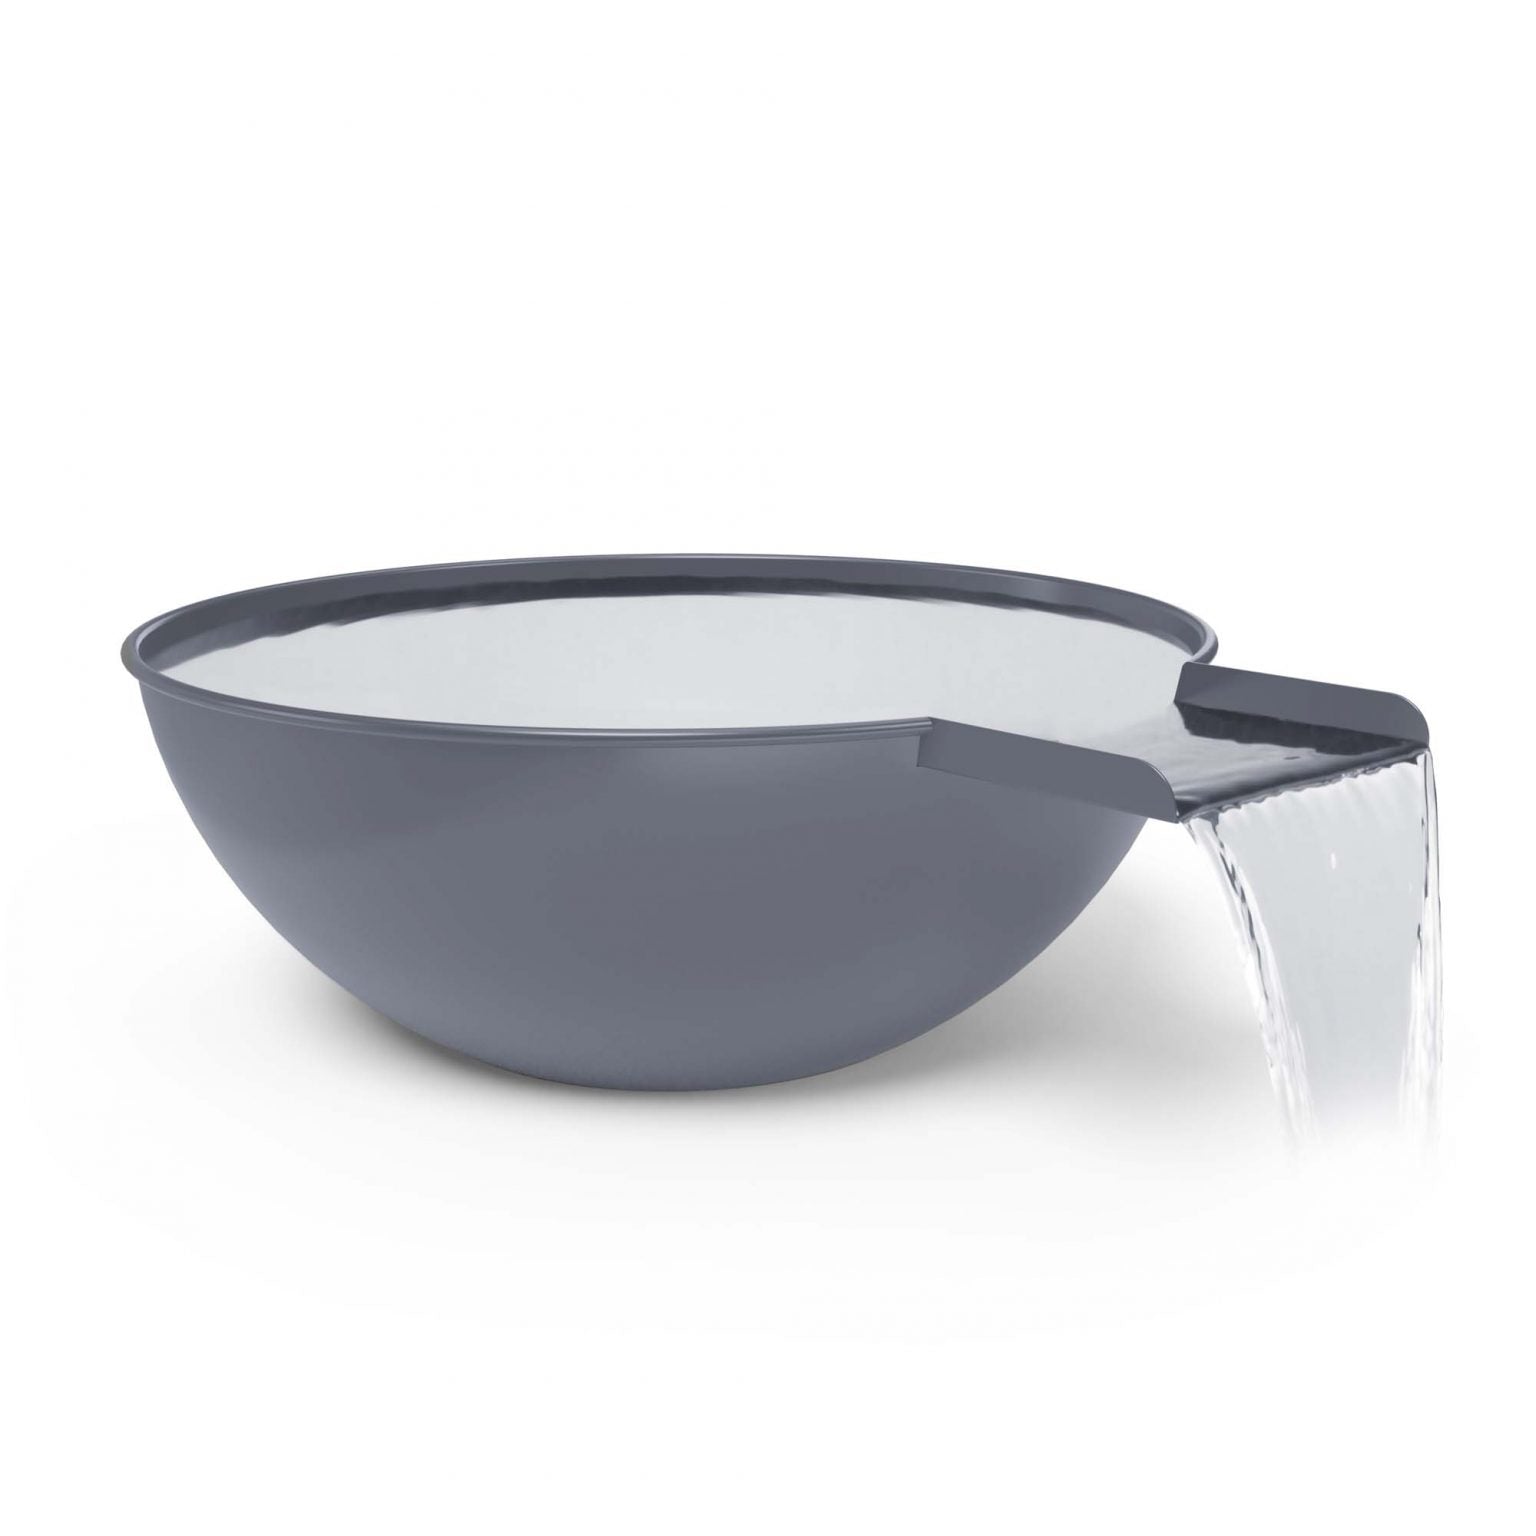 The Outdoor Plus Sedona Water Bowl Powder Coated Metal OPT-XXRPCWO - Serenity Provision